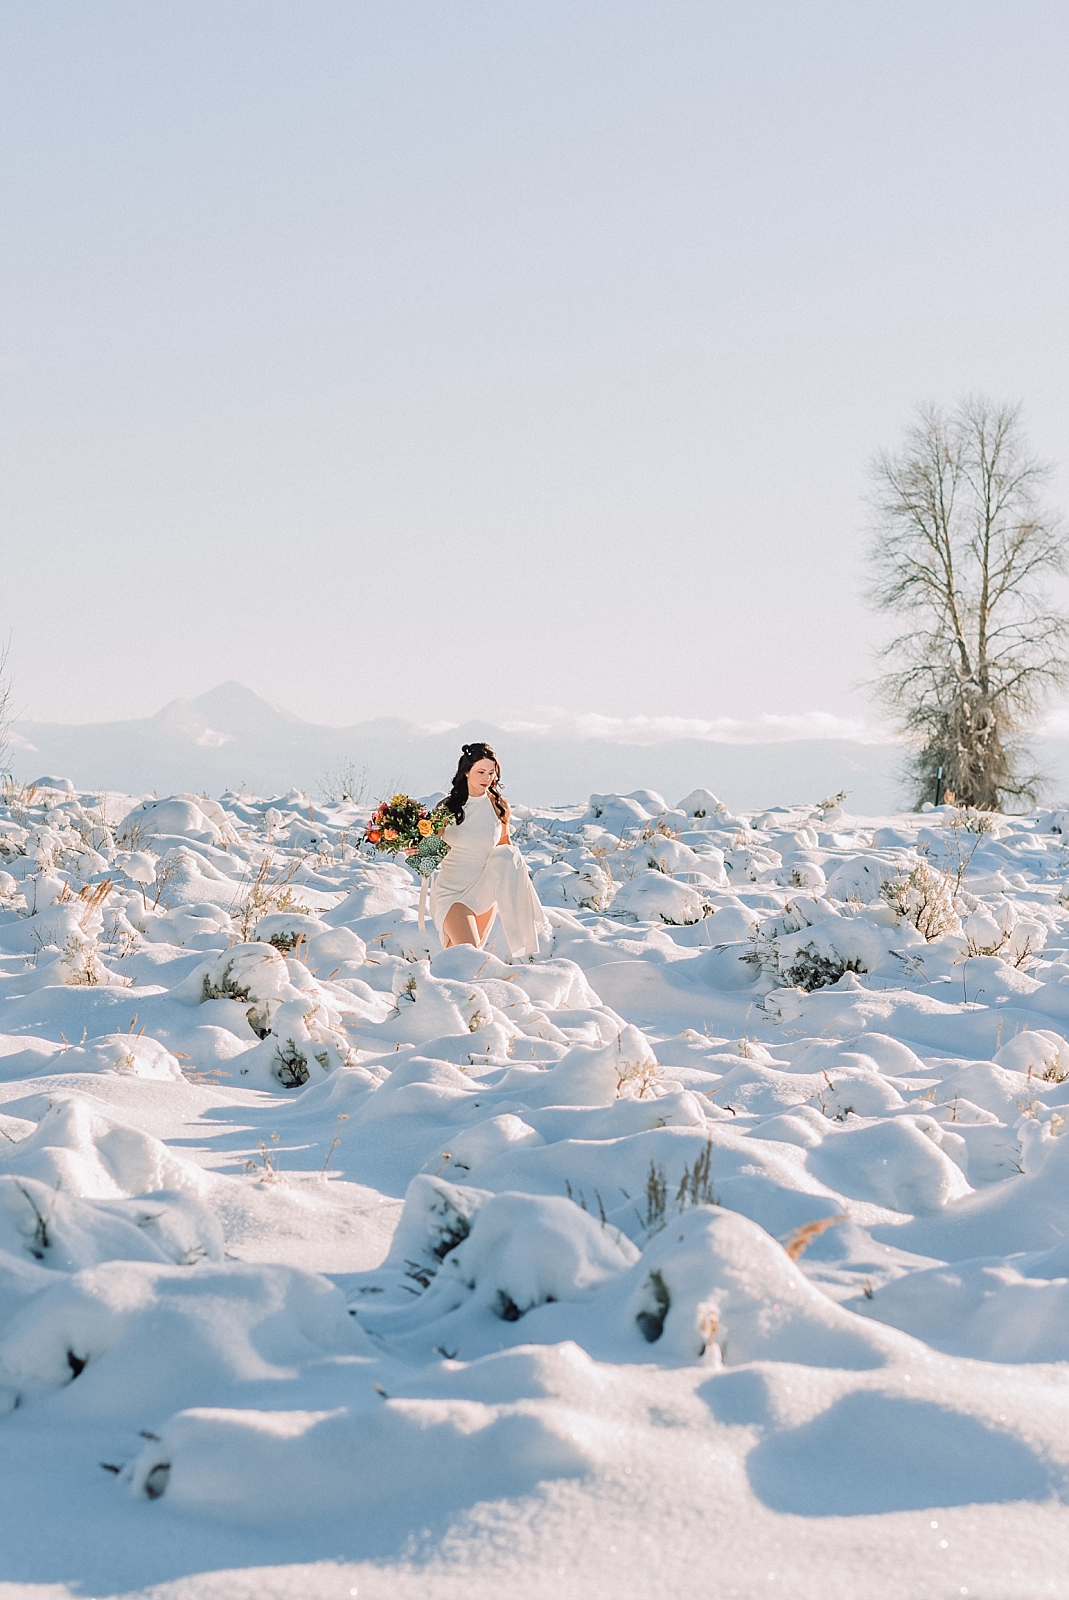 first look with bride and groom in winter wedding, jackson hole wedding photographer